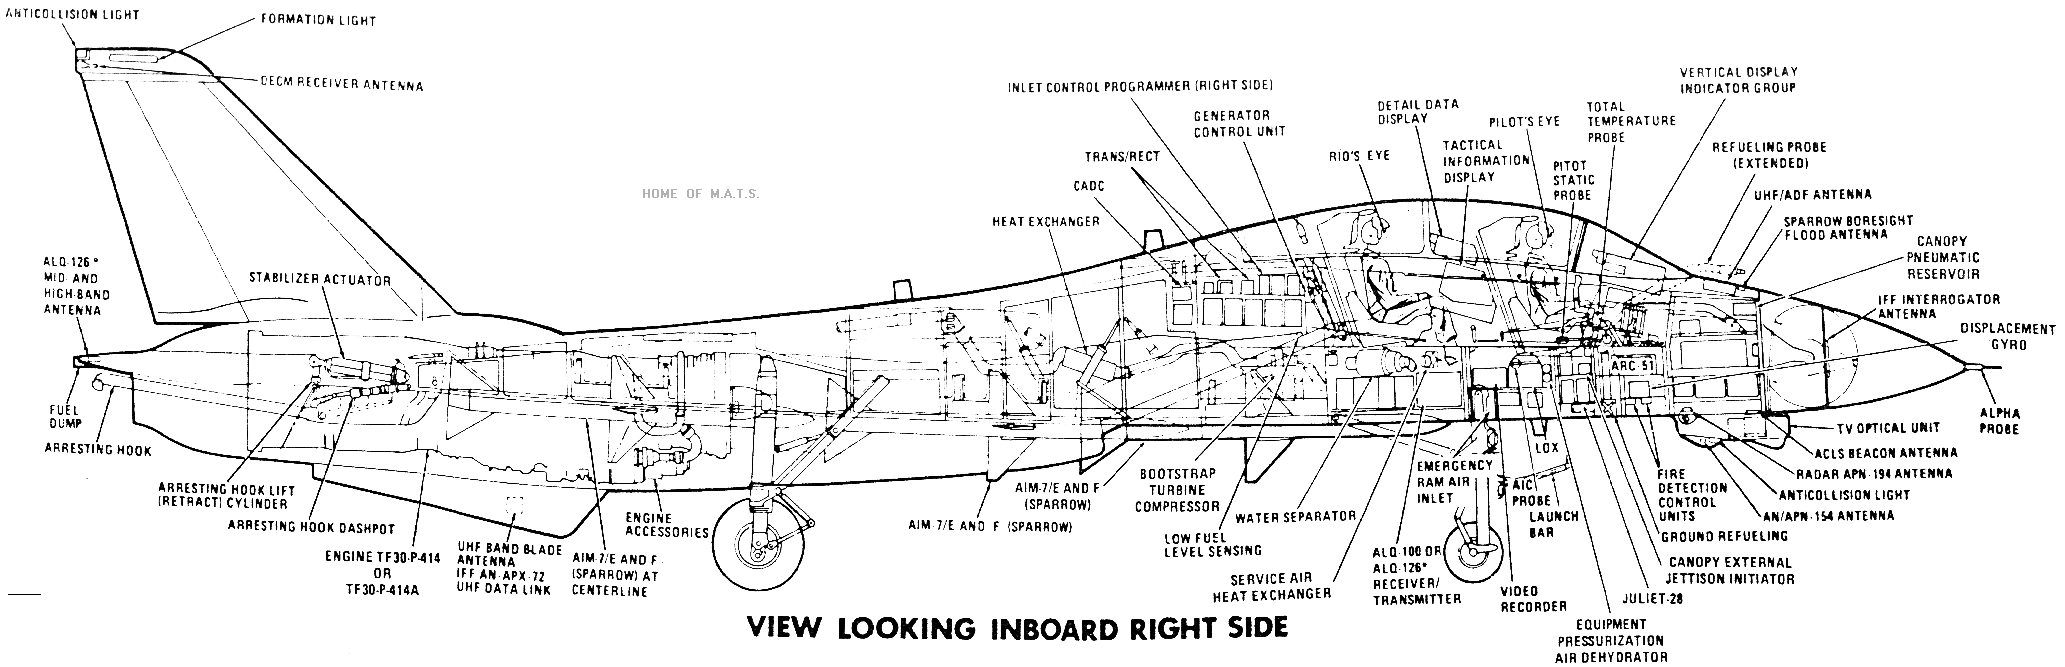 F-14A: View Looking Inboard Right Side. 